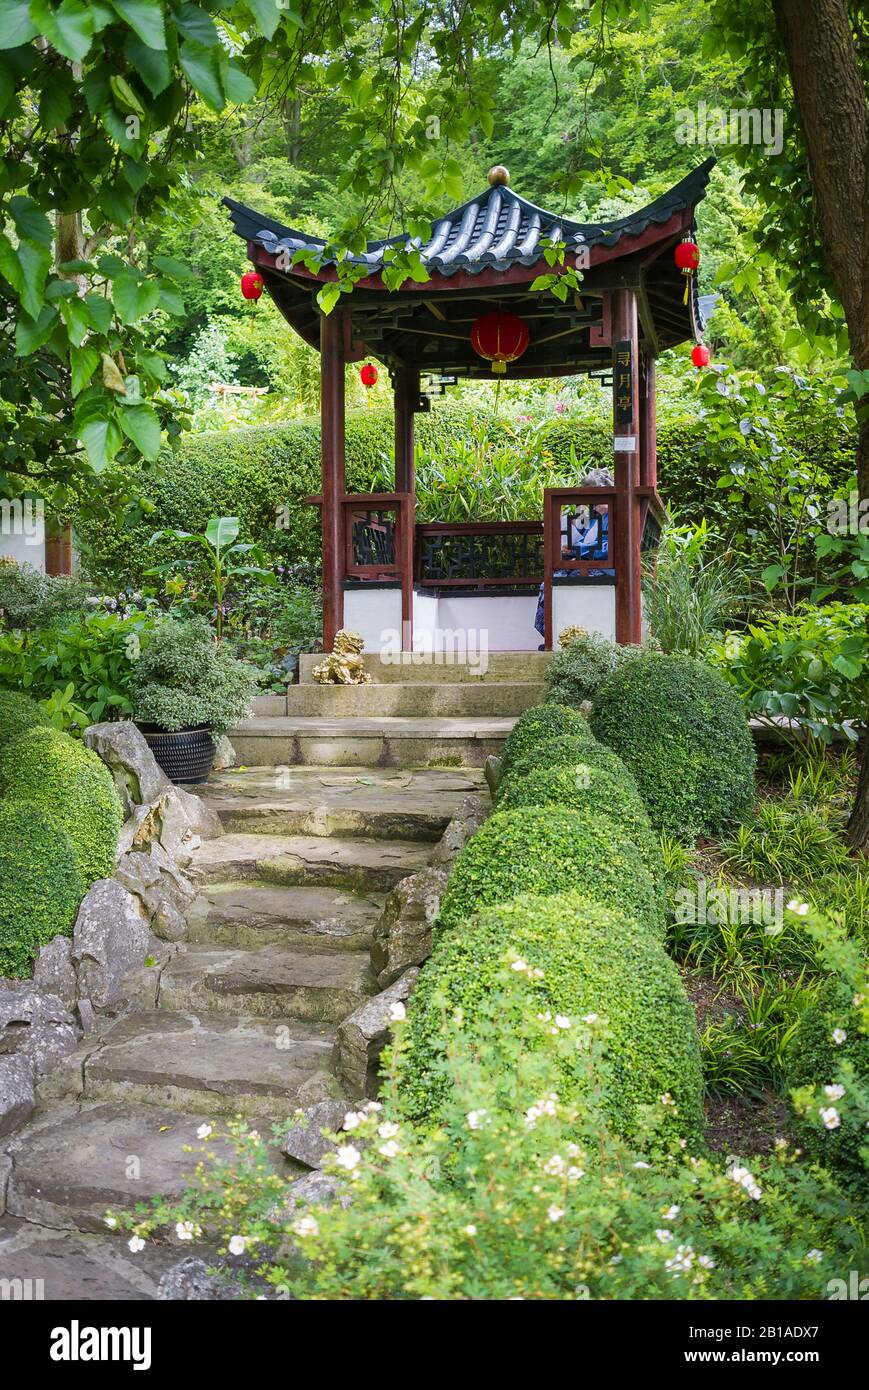 An oriental corner of an English garden syled like a Chinese garden with steps leading to a pagoda-like arbor Stock Photo